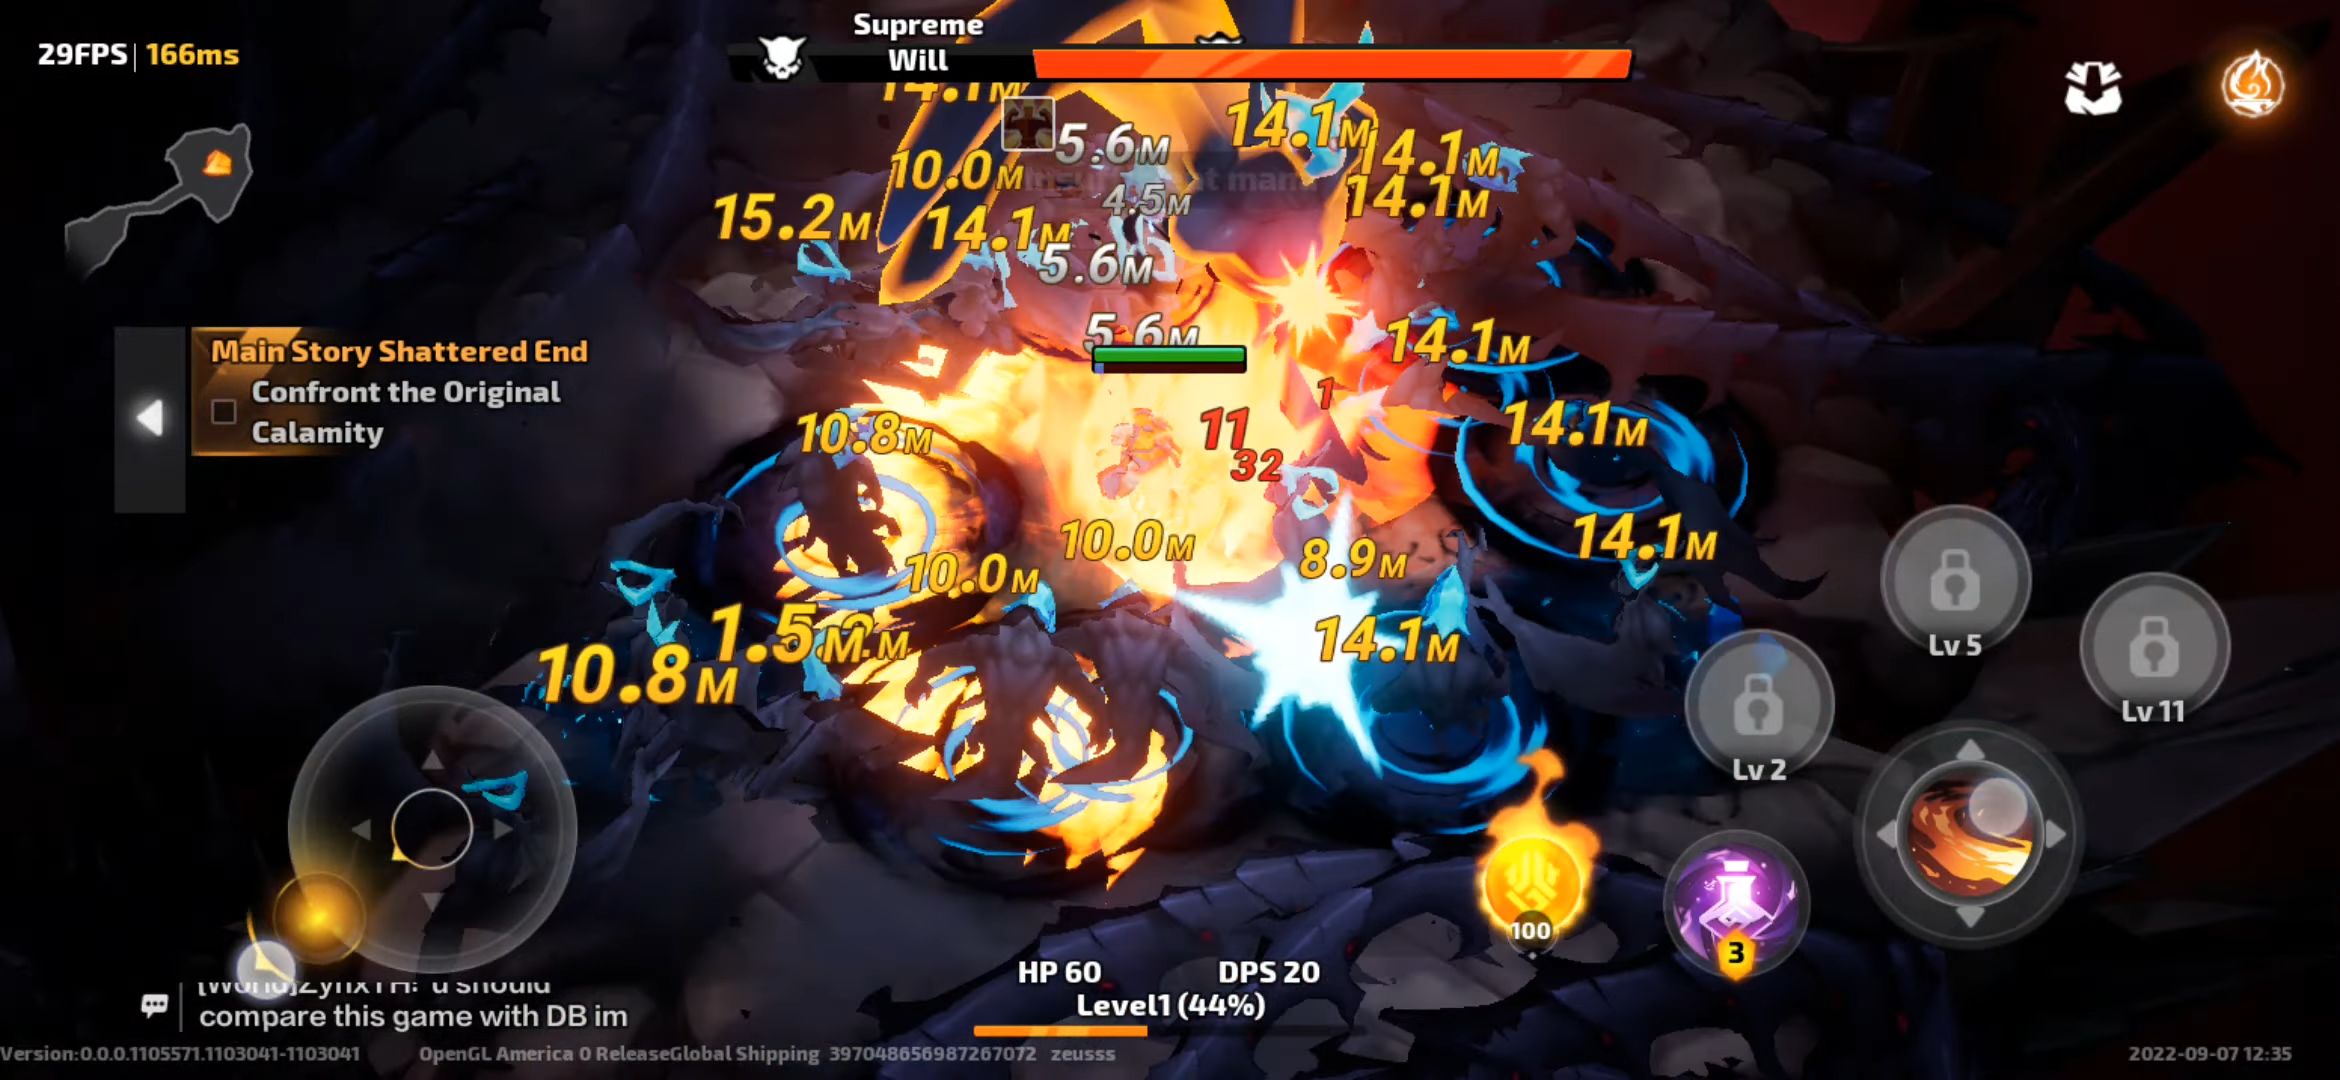 Torchlight: Infinite - Android game screenshots.